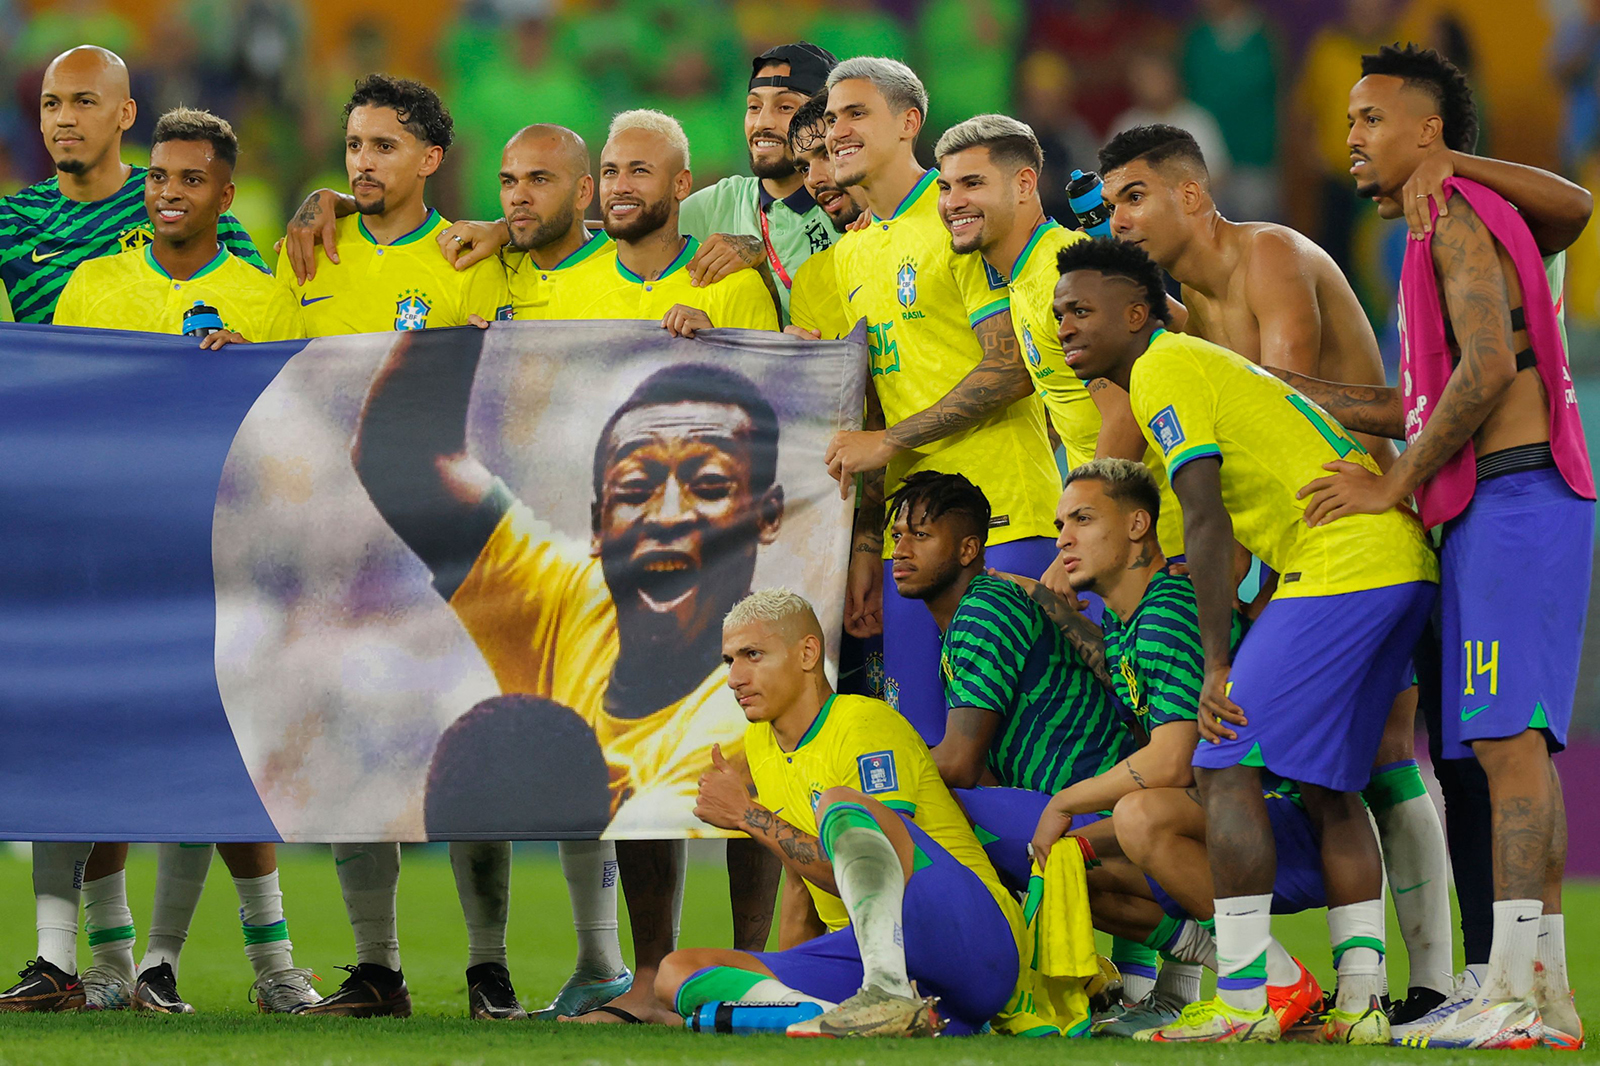 Brazil players stand behind a banner honoring Brazilian football legend Pele after they won the Qatar 2022 World Cup round of 16 football match between Brazil and South Korea at Stadium 974 in Doha on December 5.